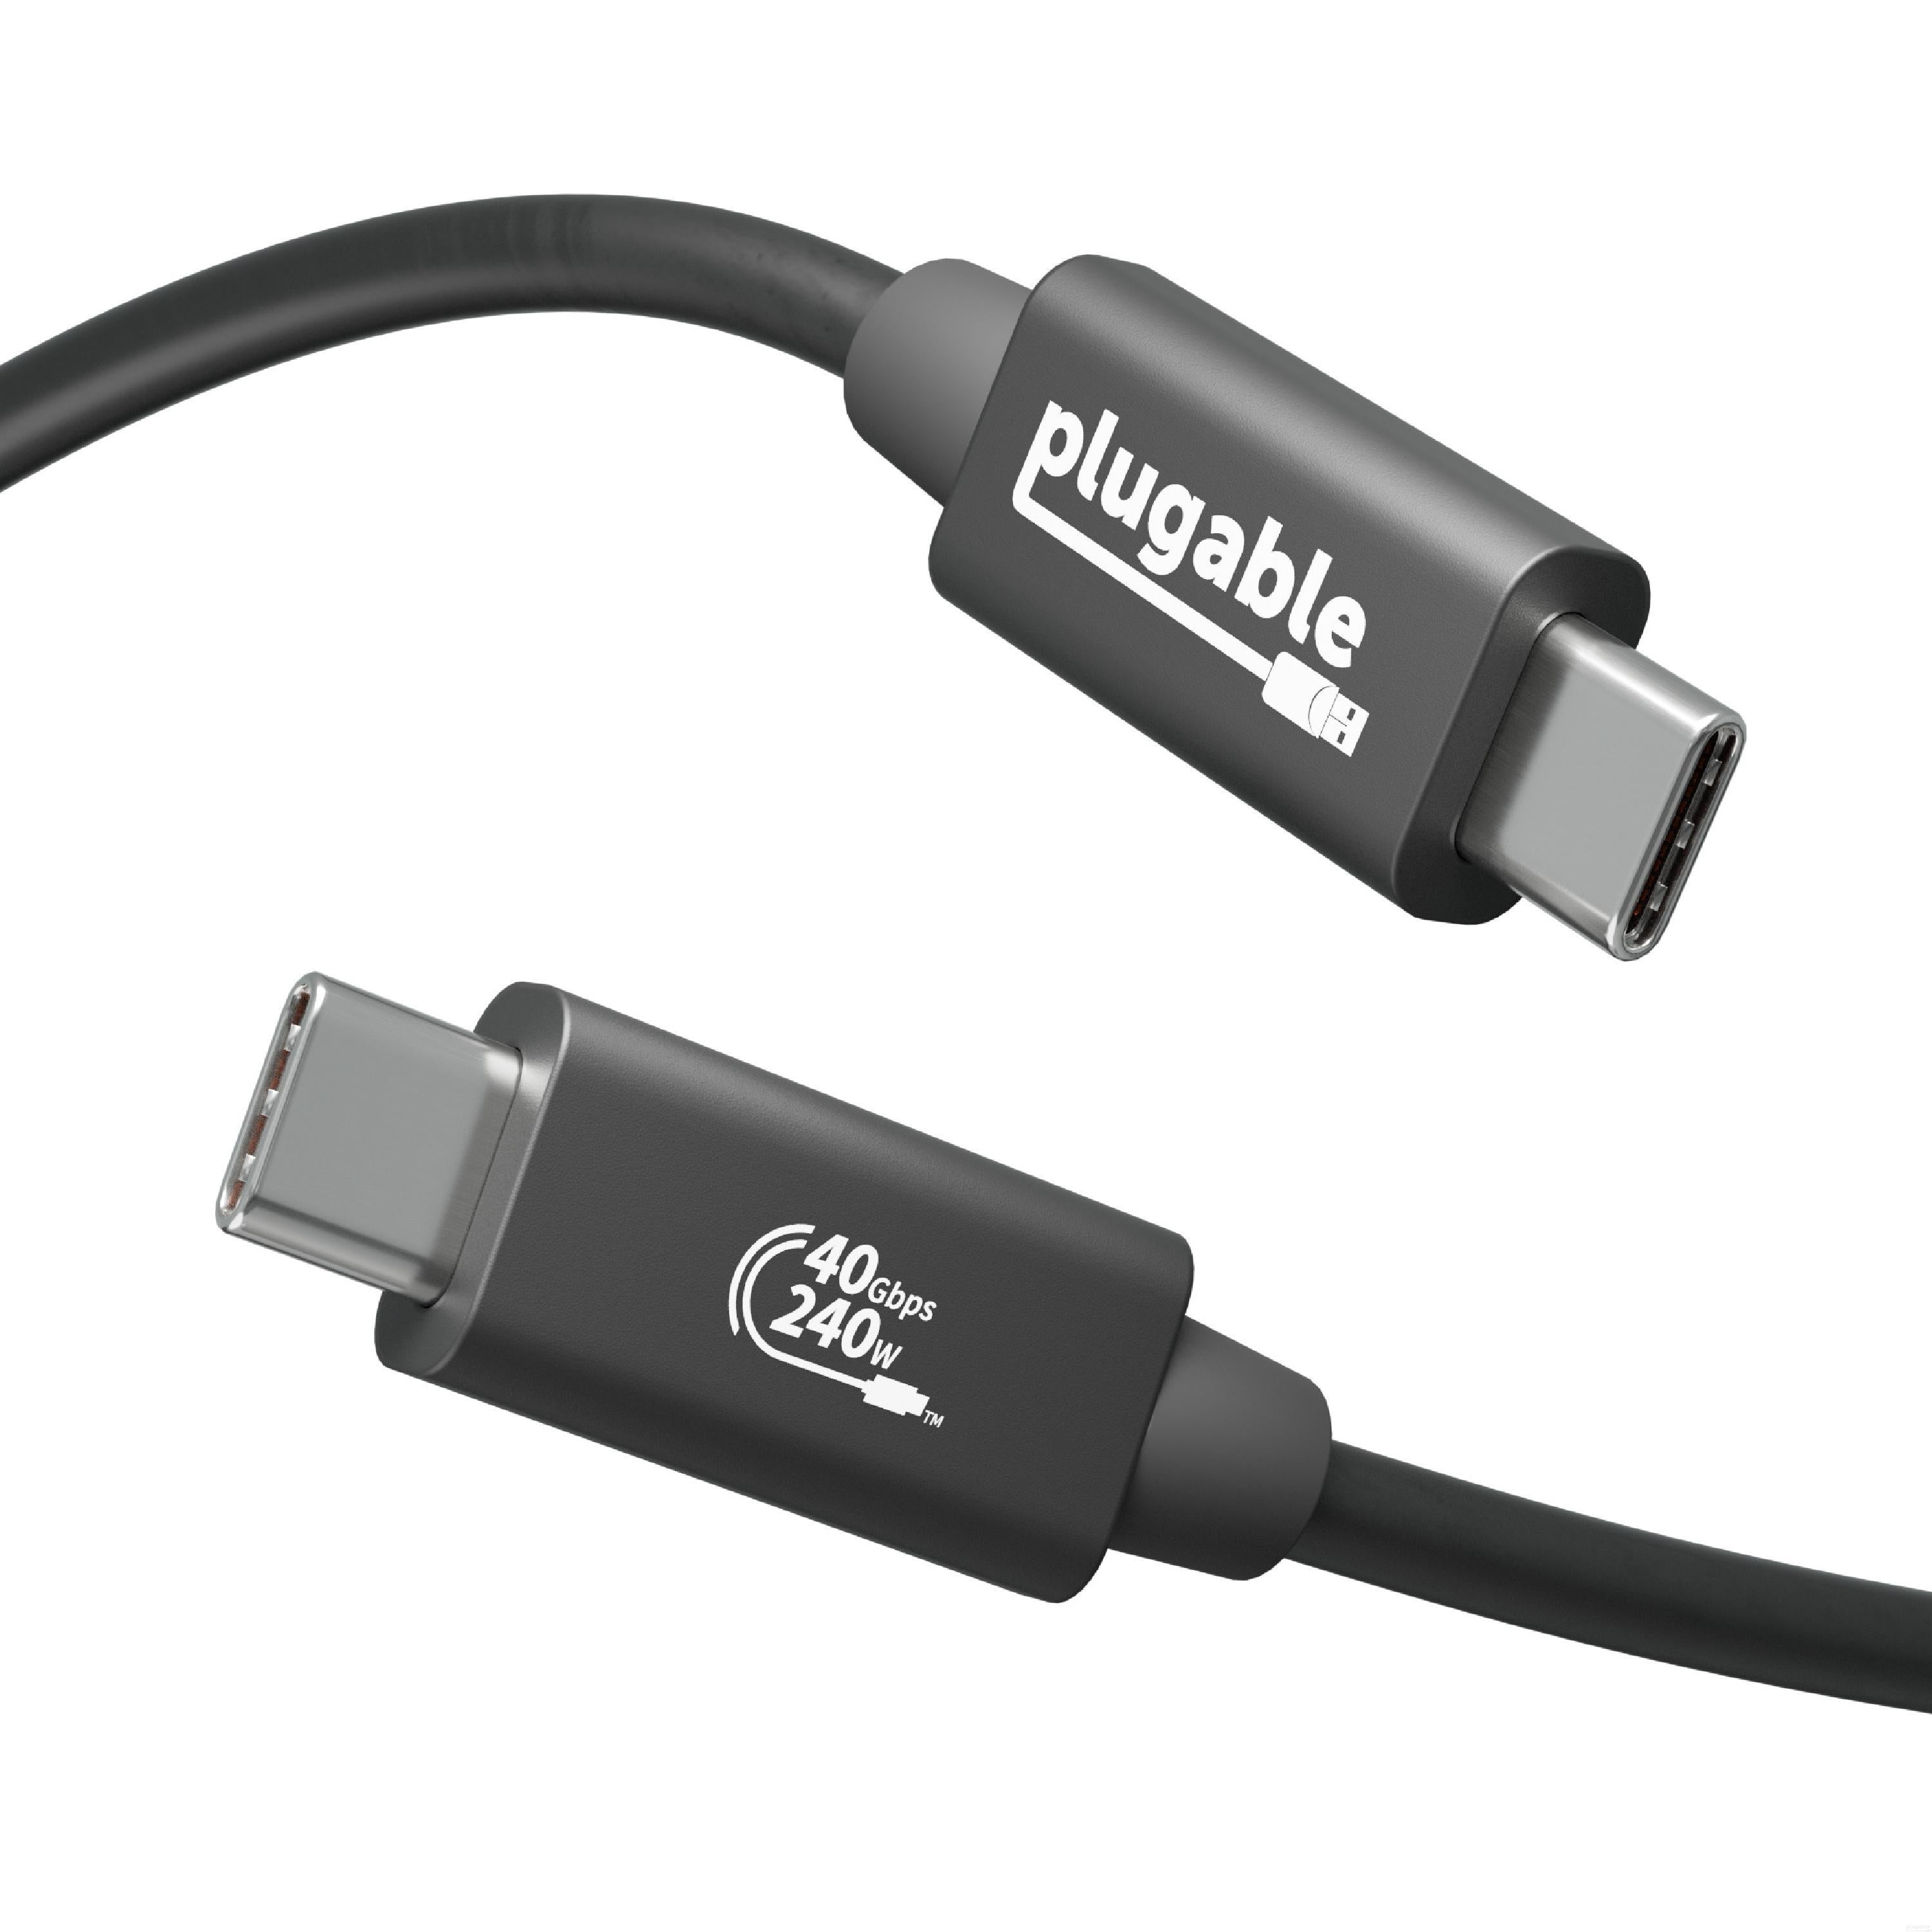 Thunderbolt 3 Cables: Features You Should Know